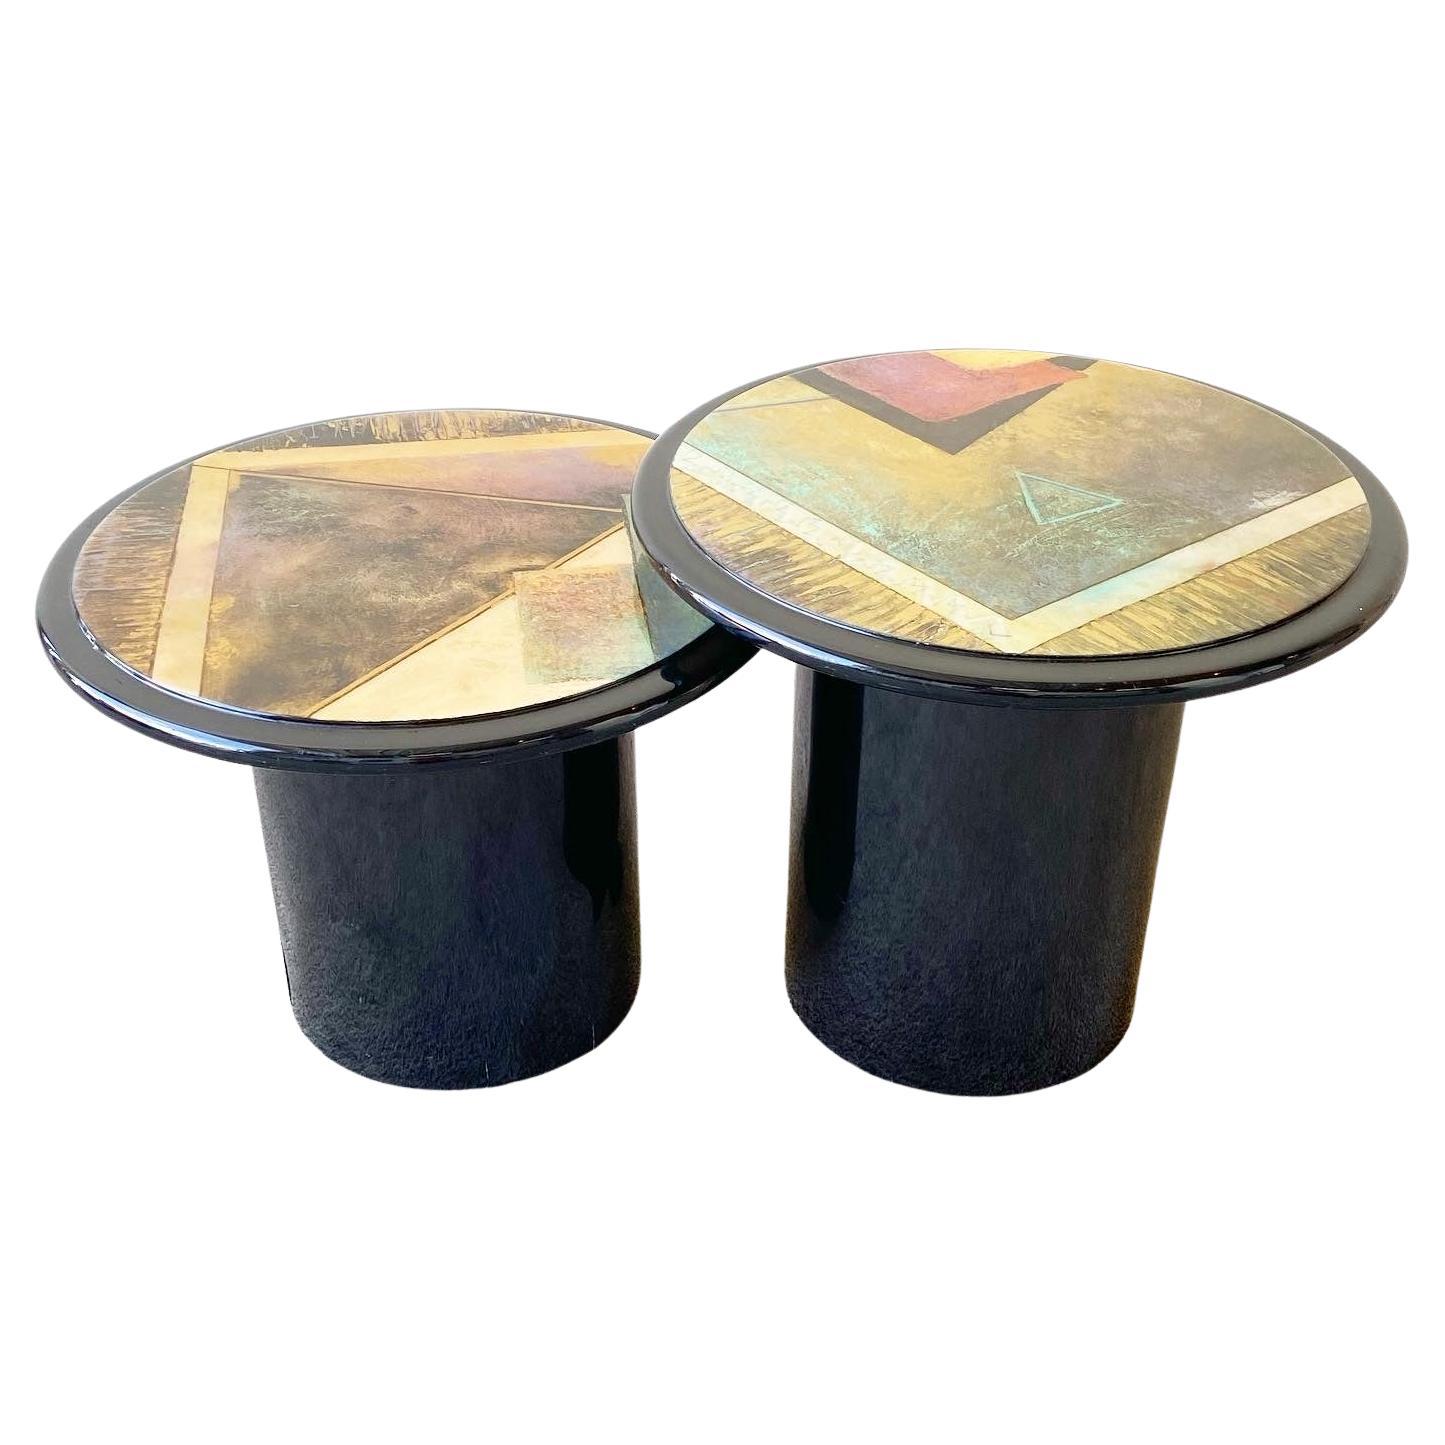 Postmodern Circular Black Lacquered and Painted Mushroom Side Tables - a Pair For Sale